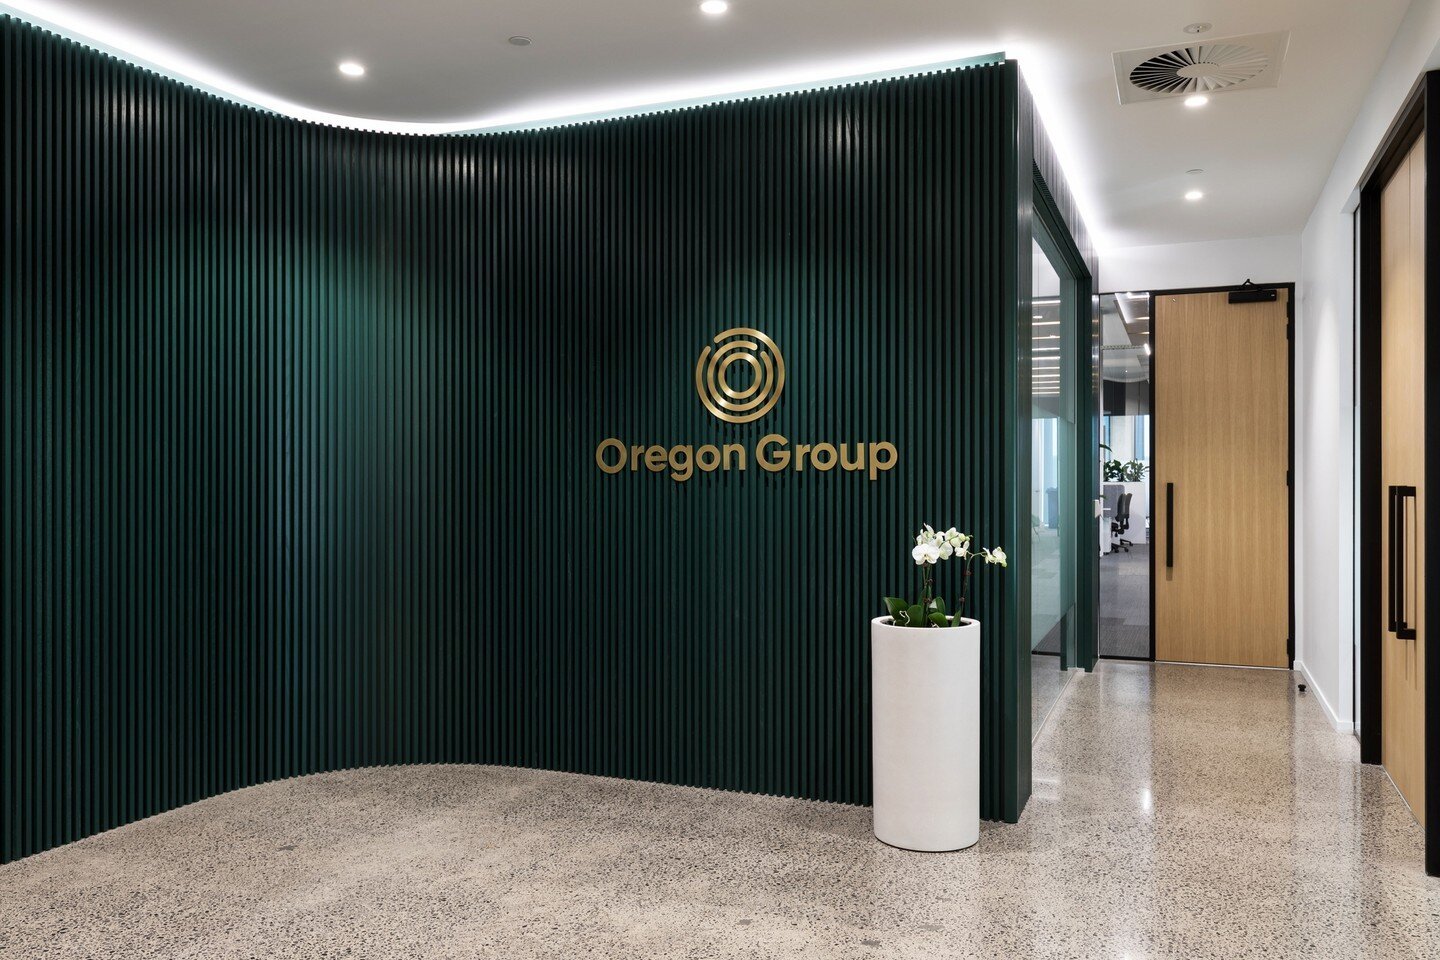 MODE Auckland was commissioned to design a new office fit-out for Oregon Group in Grafton, Auckland. The team implemented bespoke design into this office fit-out which included the construction of a curved green timber batten wall in the reception of